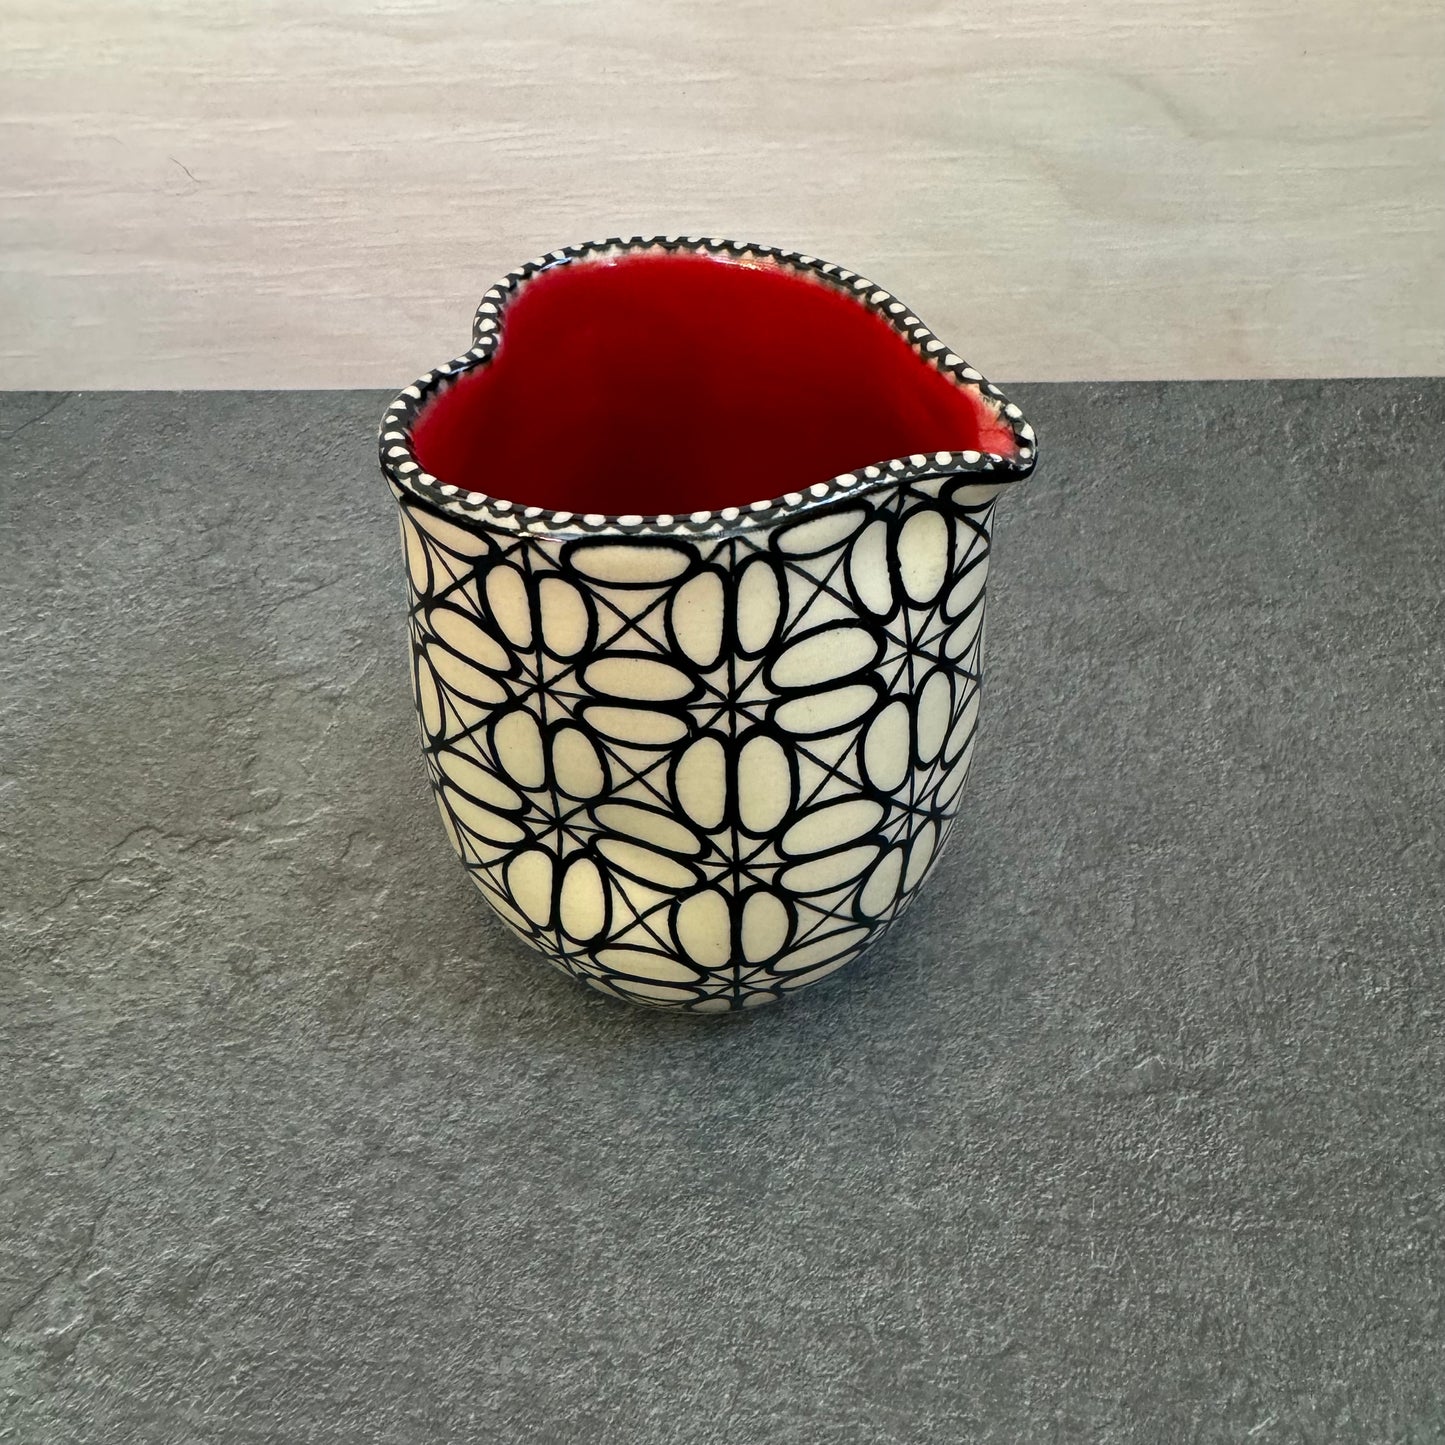 Heart Cup with Black Tangled Circle Design